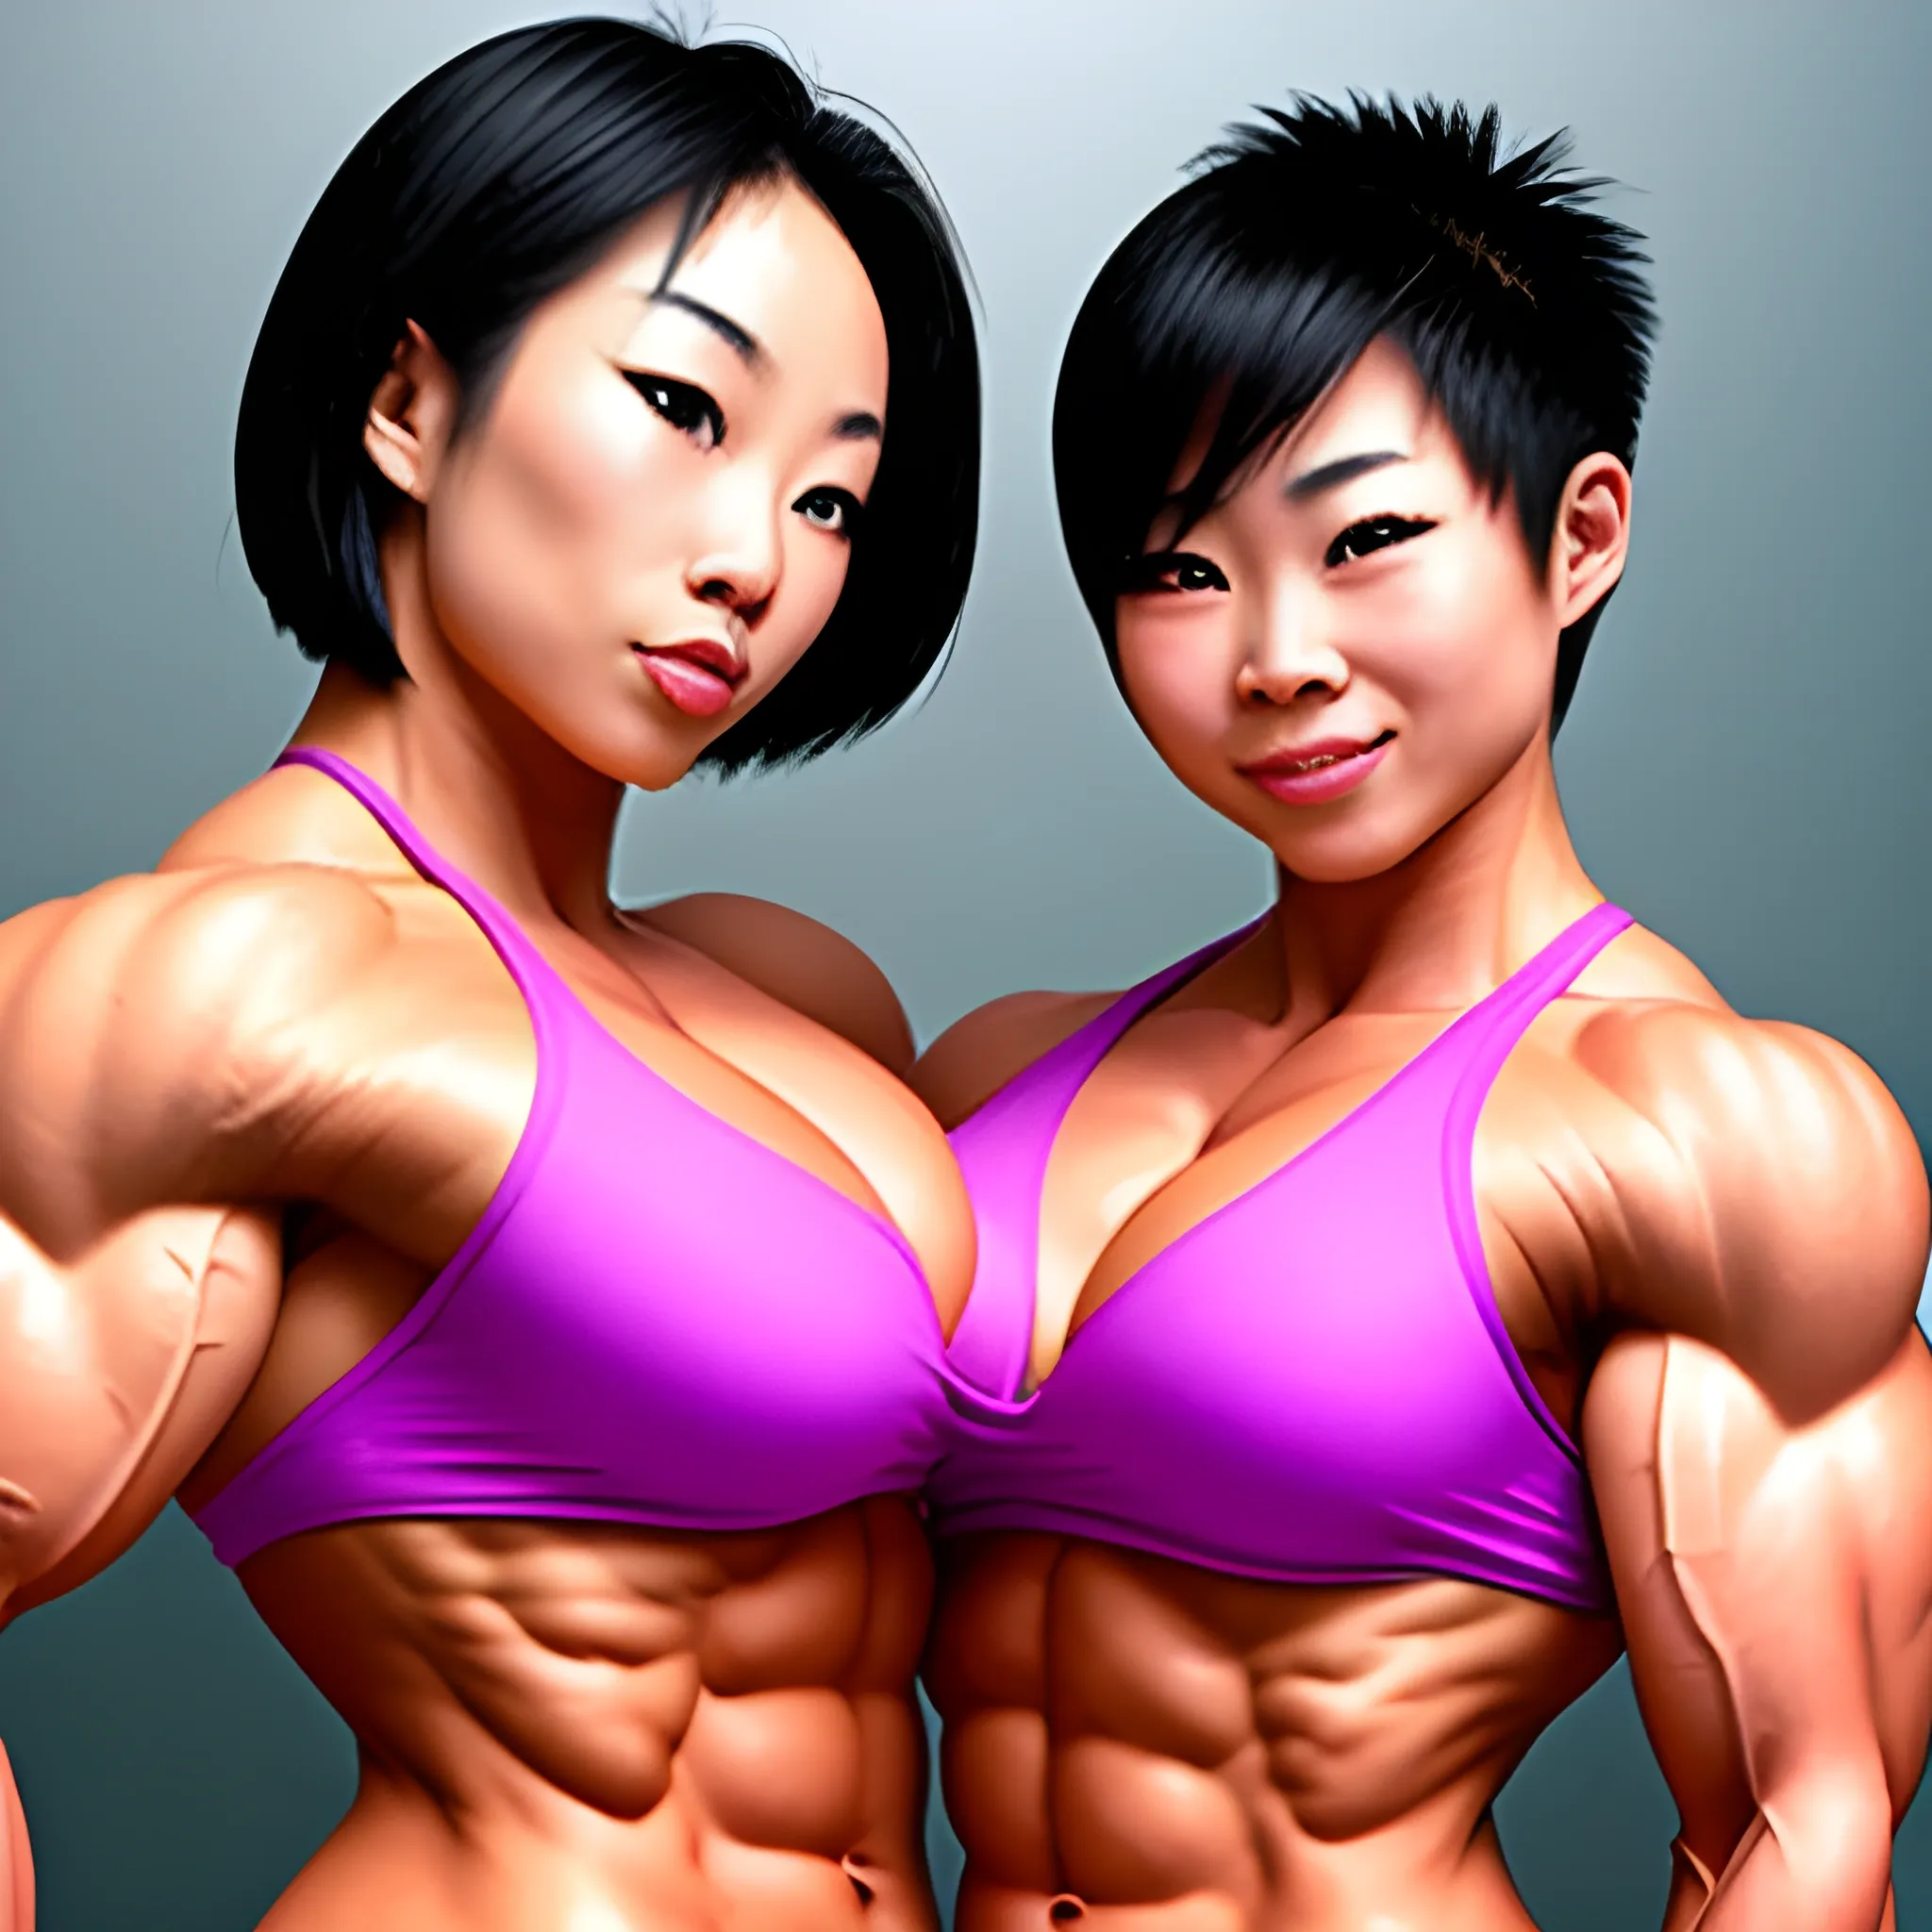 Two sexy Asian female bodybuilders kissing. They have short hair, large breasts, and wide, muscular bodies. , Cartoon